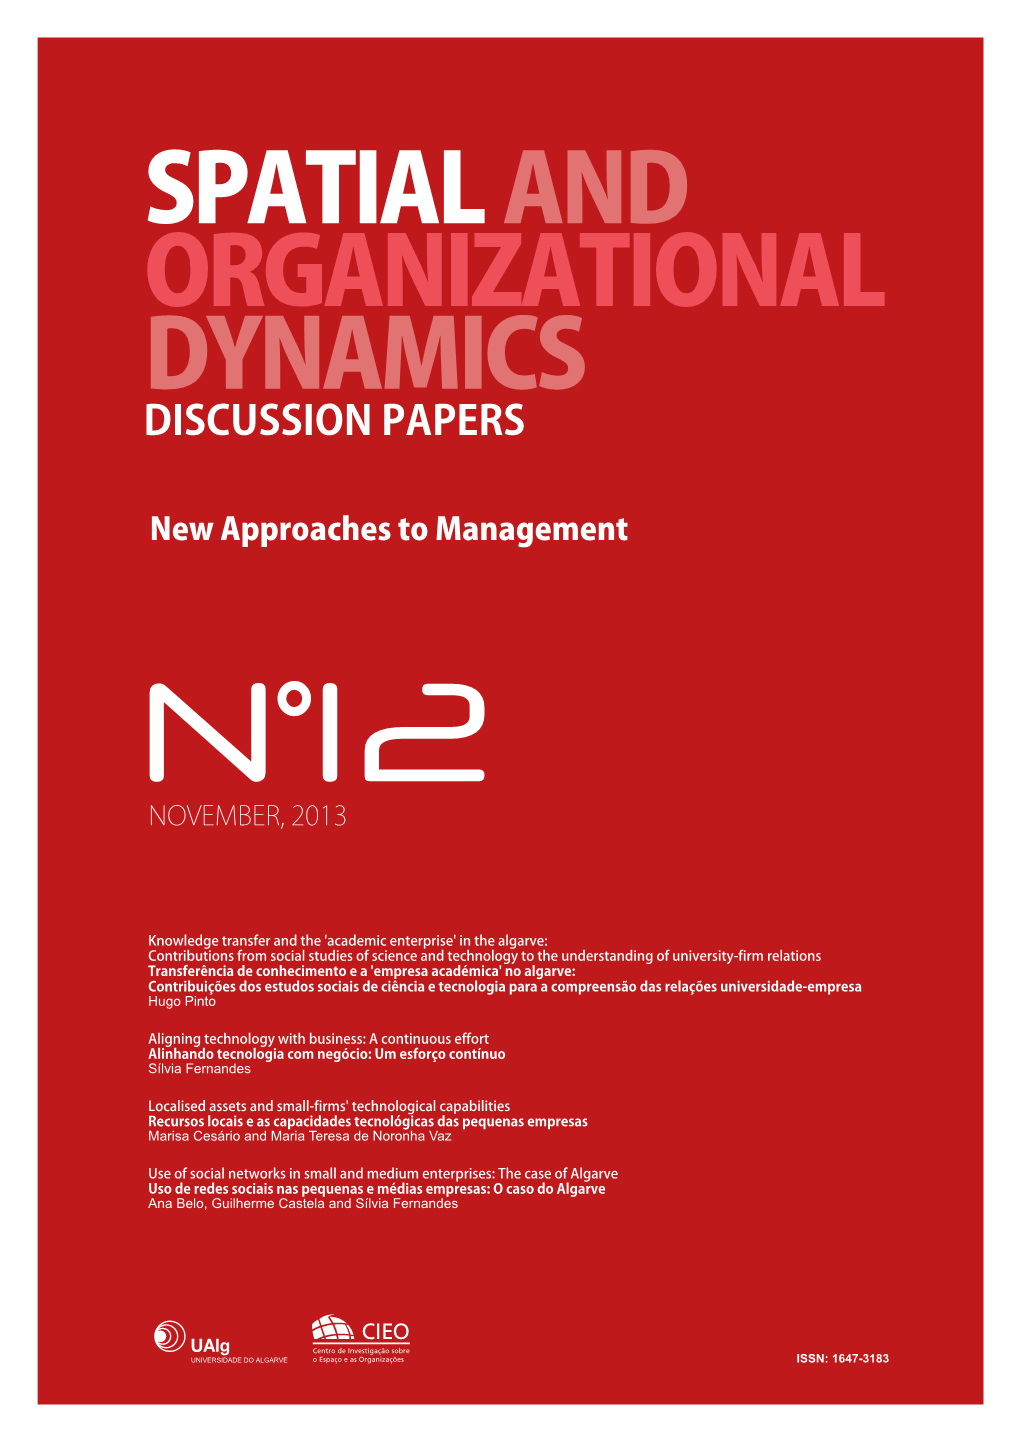 Spatial and Organizational Dynamics Discussion Papers